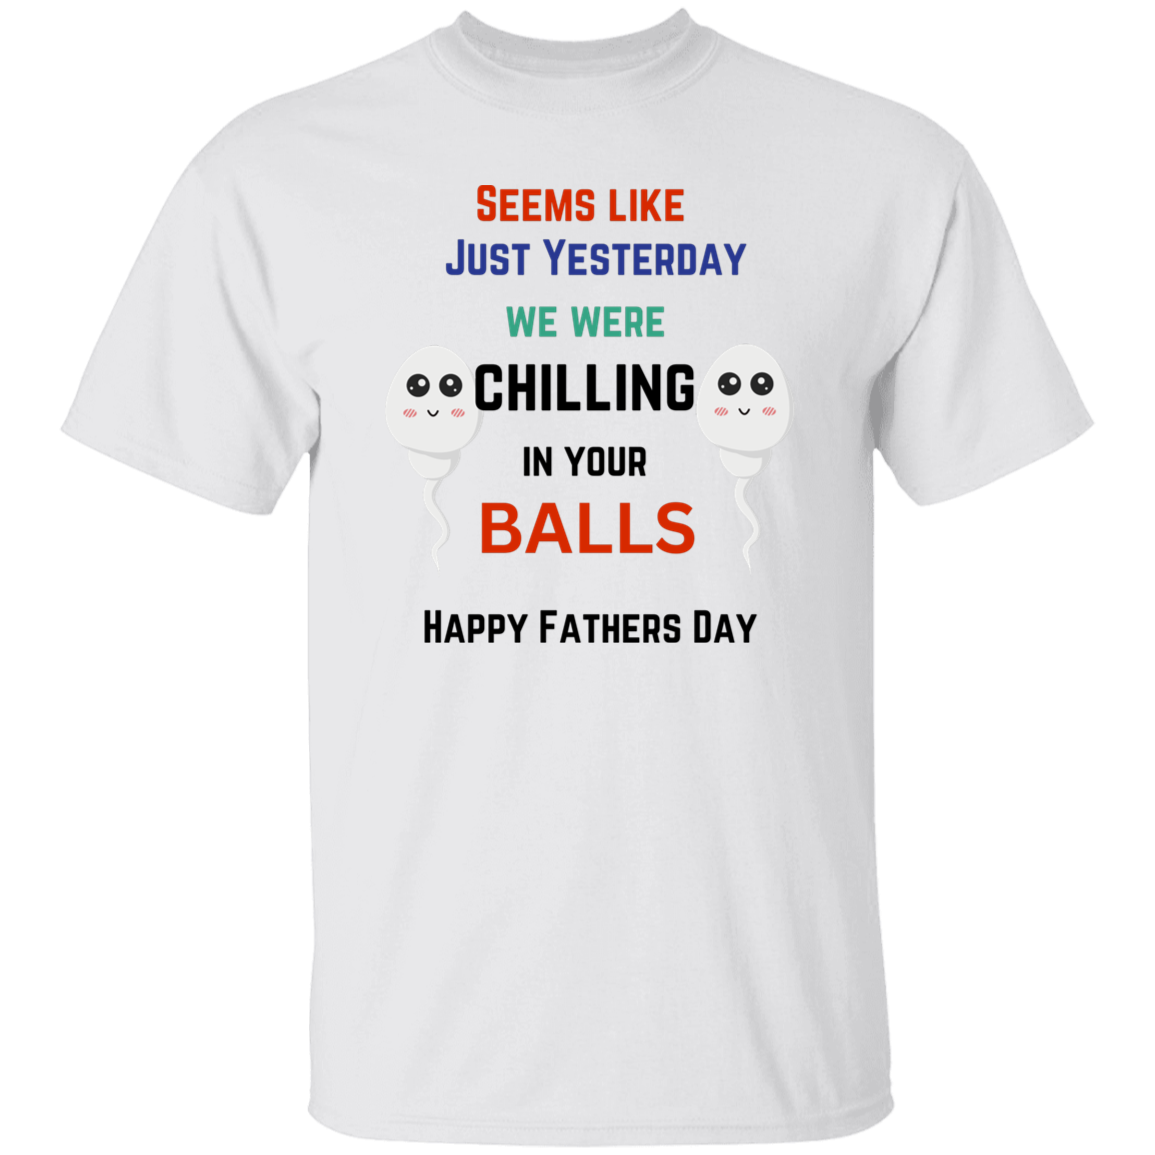 FATHERS DAY T SHIRT